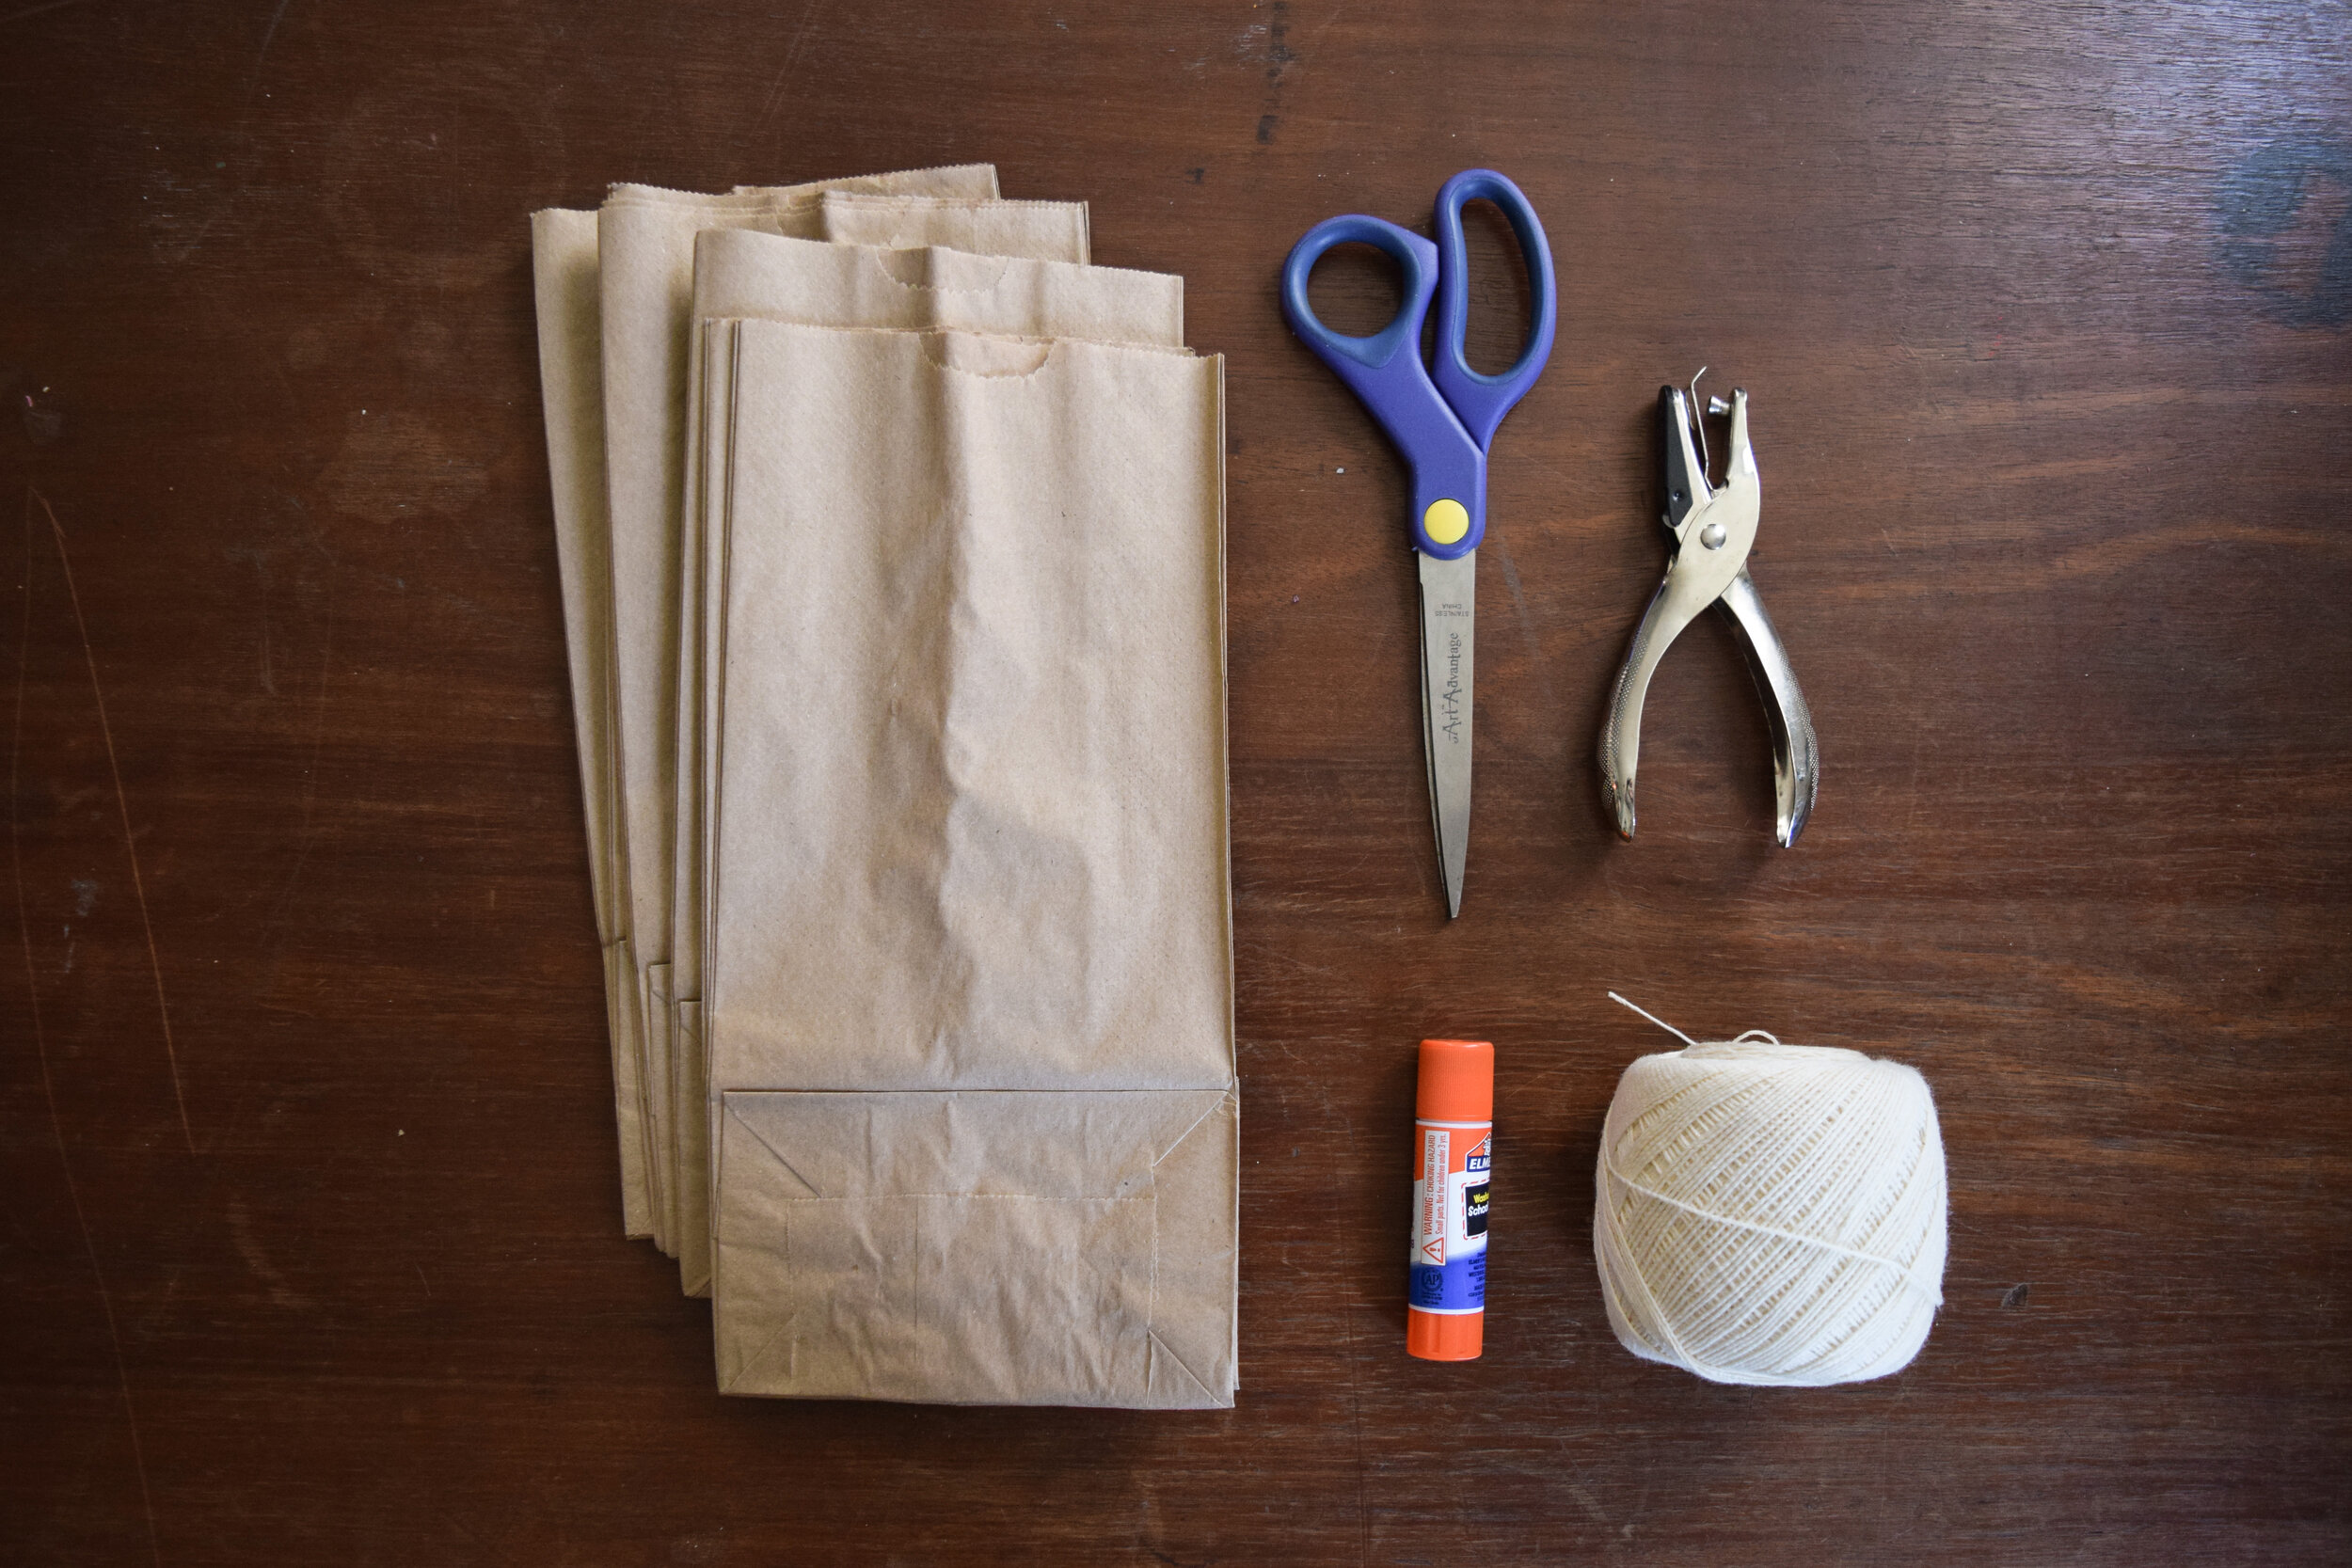 How To Make a Paper Bag - Big Paper Shopping Bag Craft Ideas (Very Easy) 